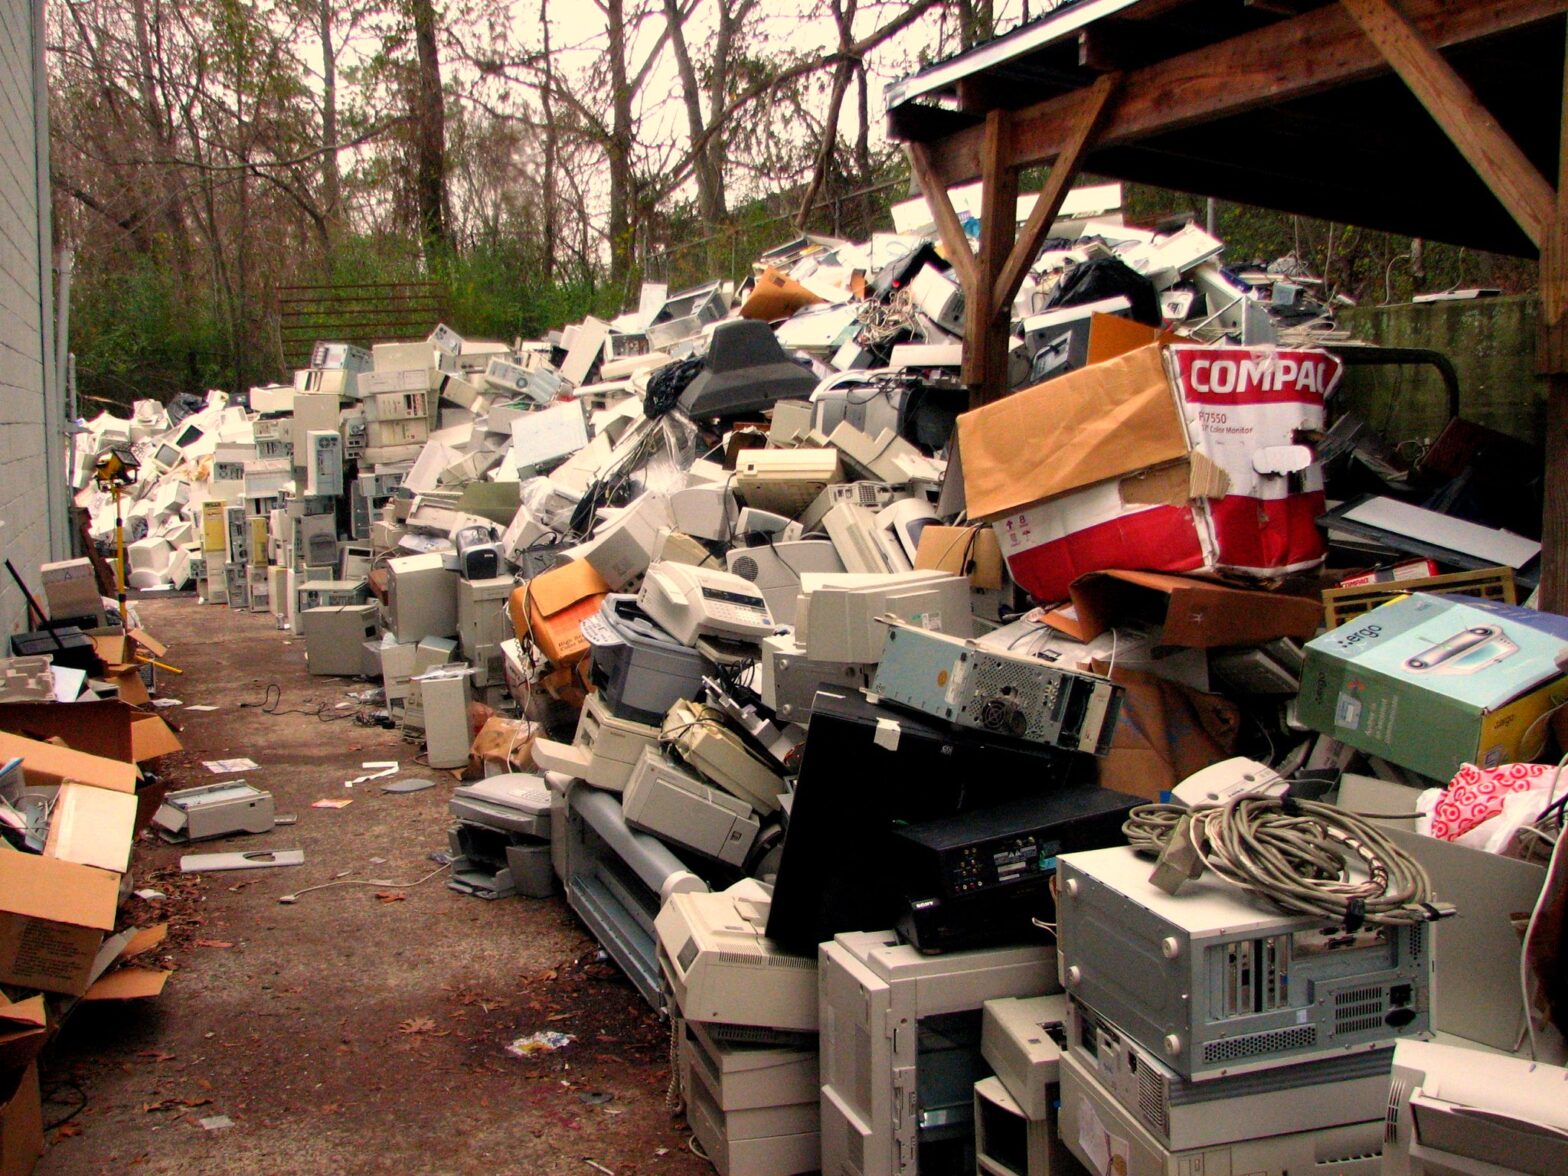 image of rubbish at a waste land site